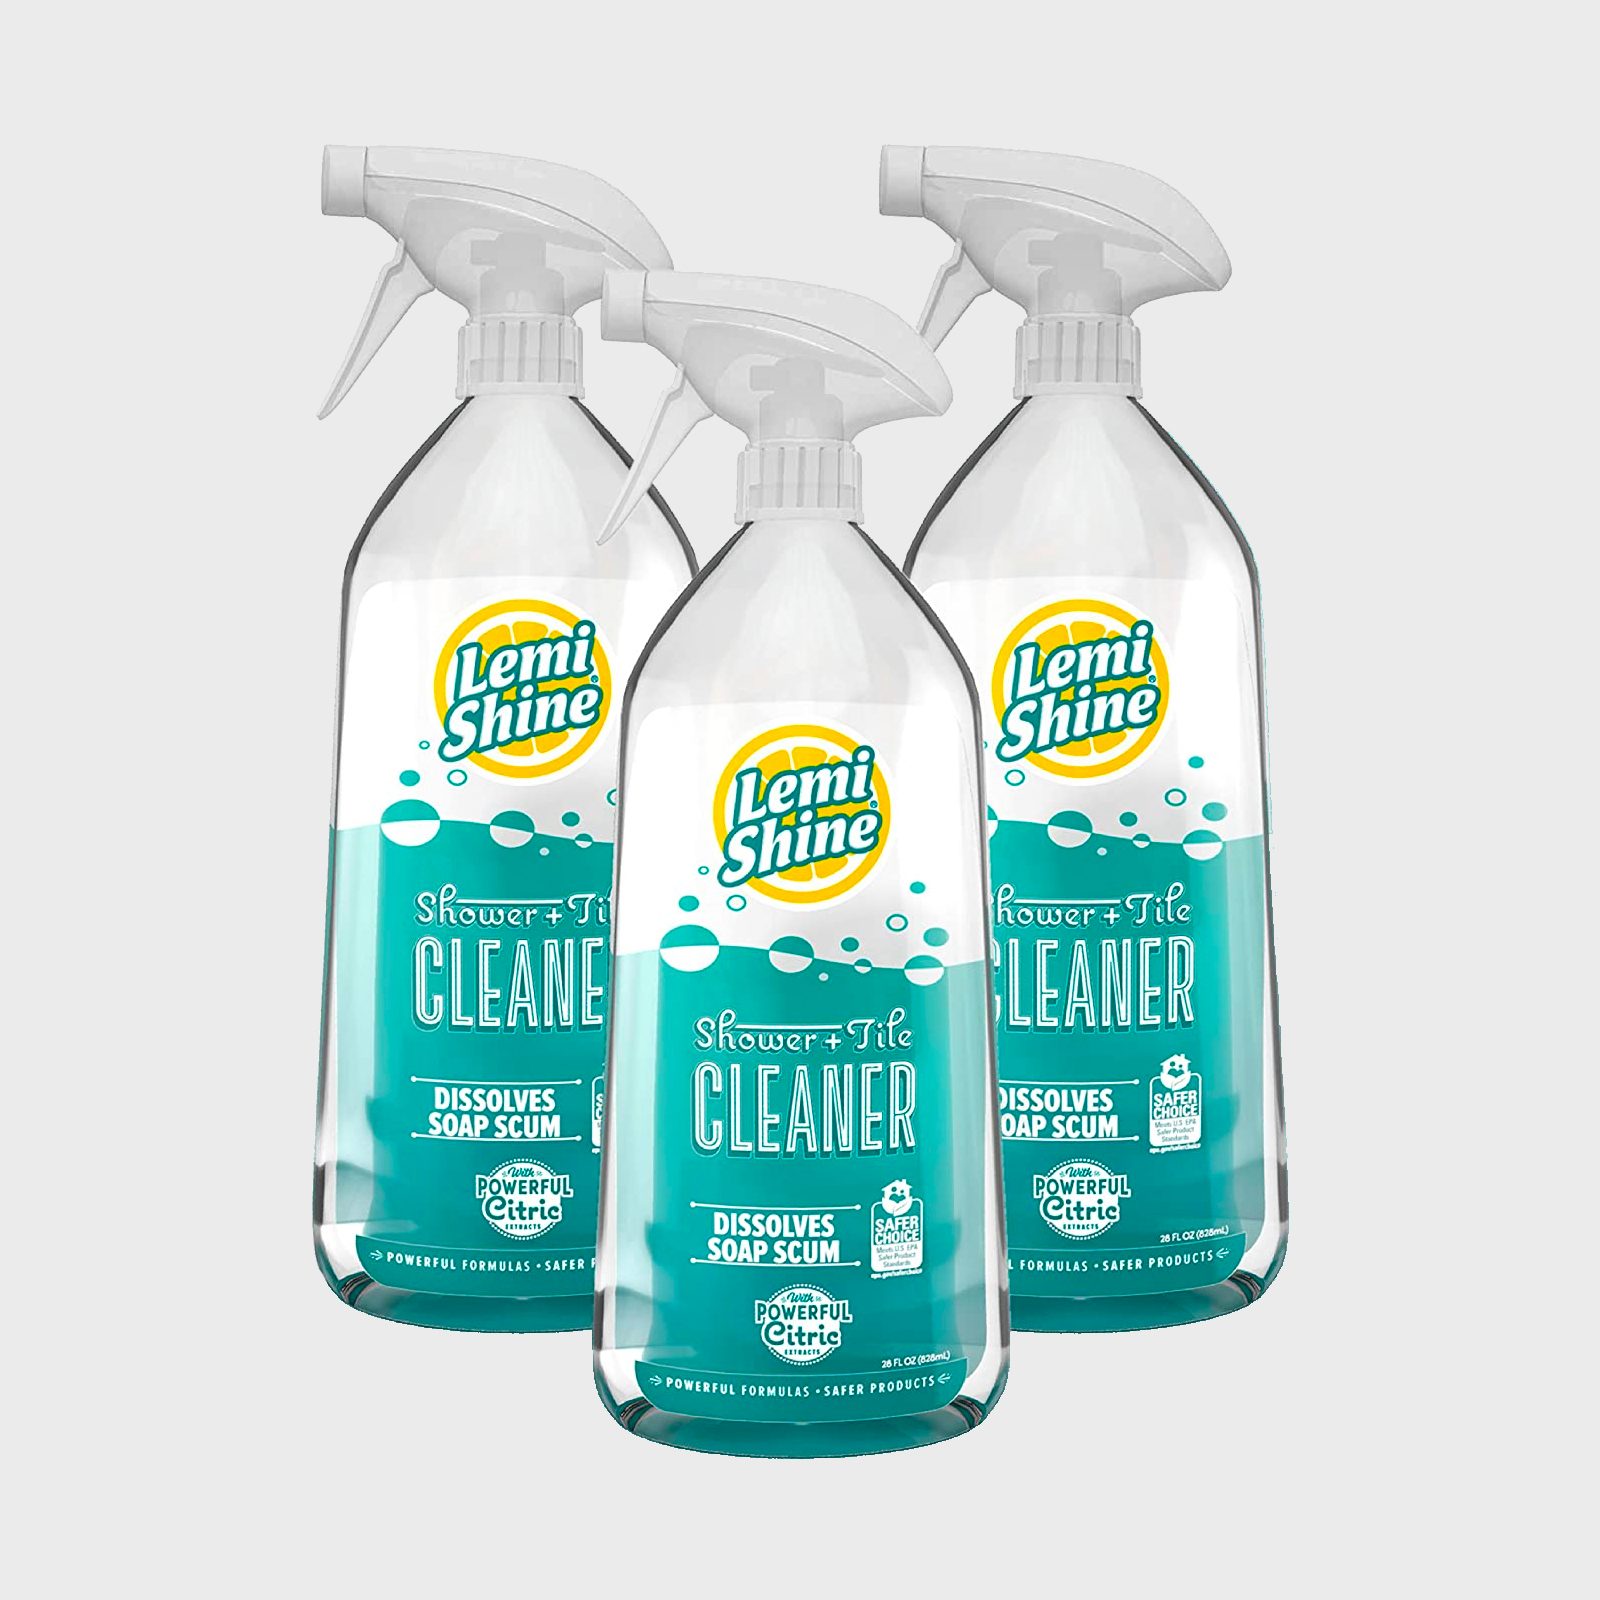 21 Eco-Friendly Cleaning Products You Should Use ASAP